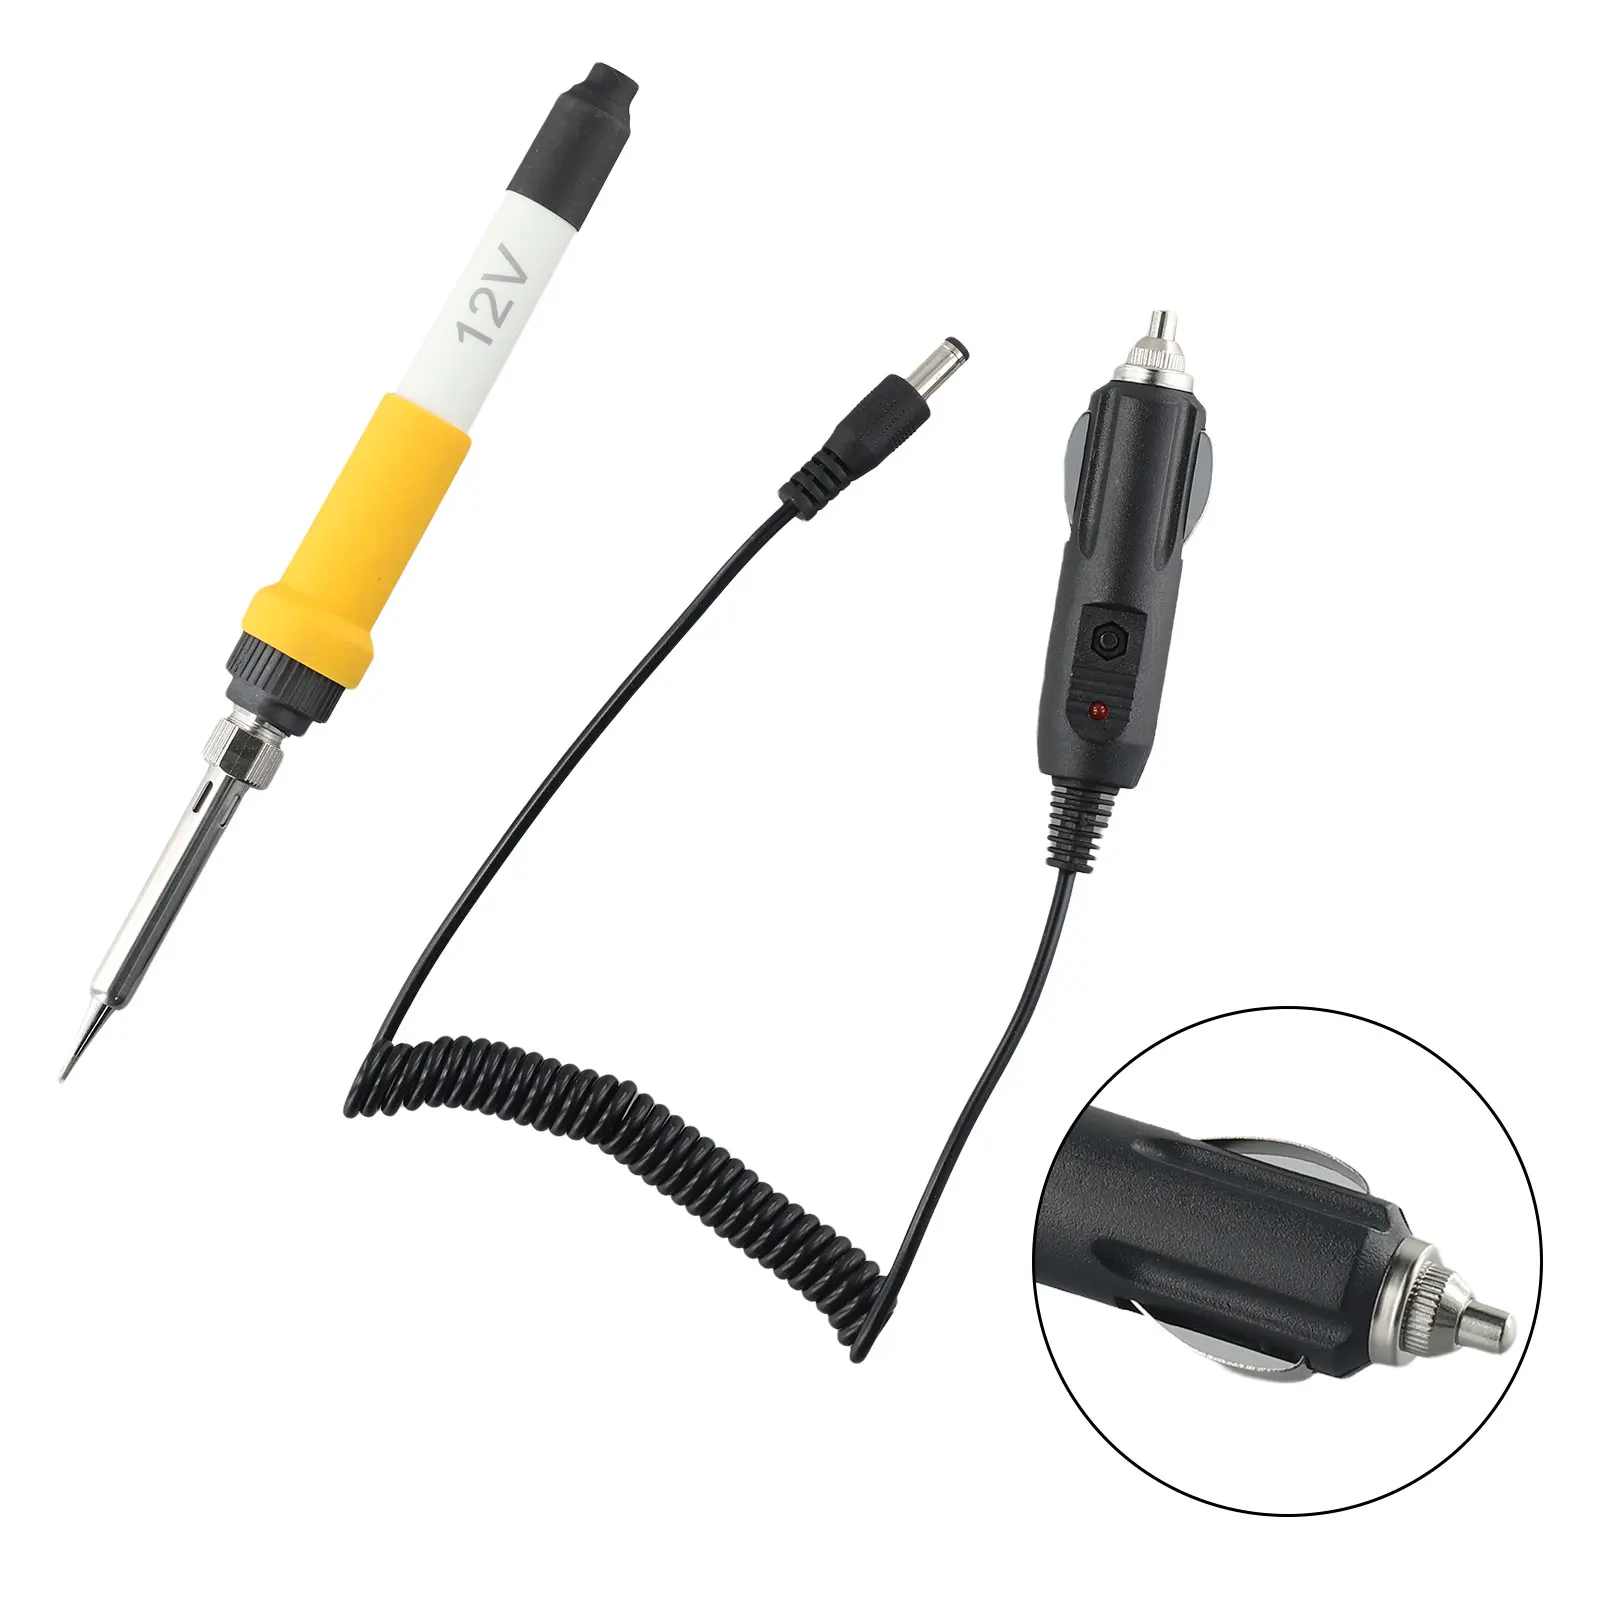 

12V Volt DC 60W Electric Solder Soldering Iron For Car With Car Clip Power Socket Ceramic Heating Core Heat Insulated Silicone